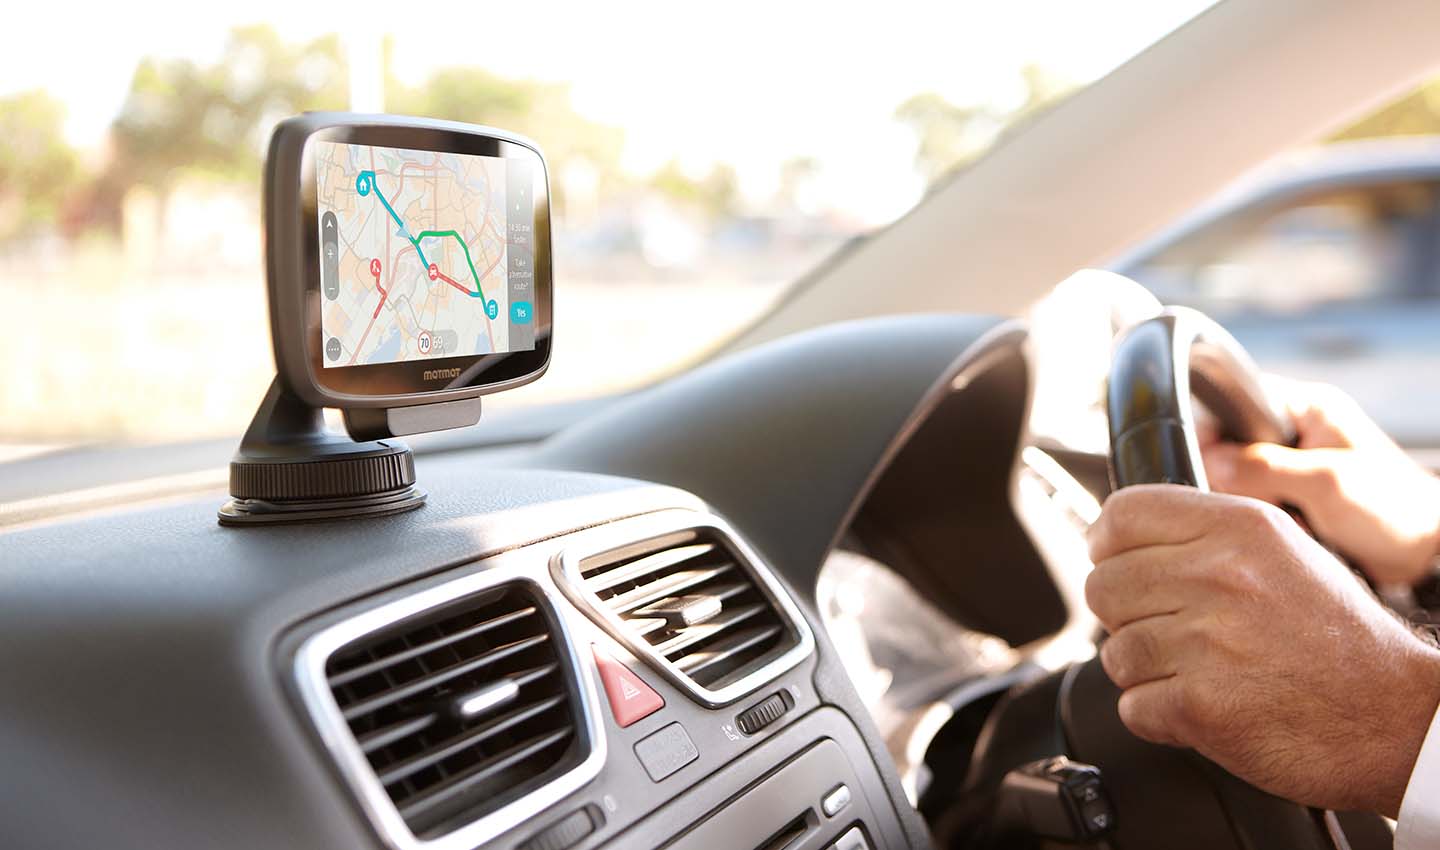 The TomTom PND brough in-car navigation to the masses in an easy-to-use, all-in-one format that proved incredibly popular.